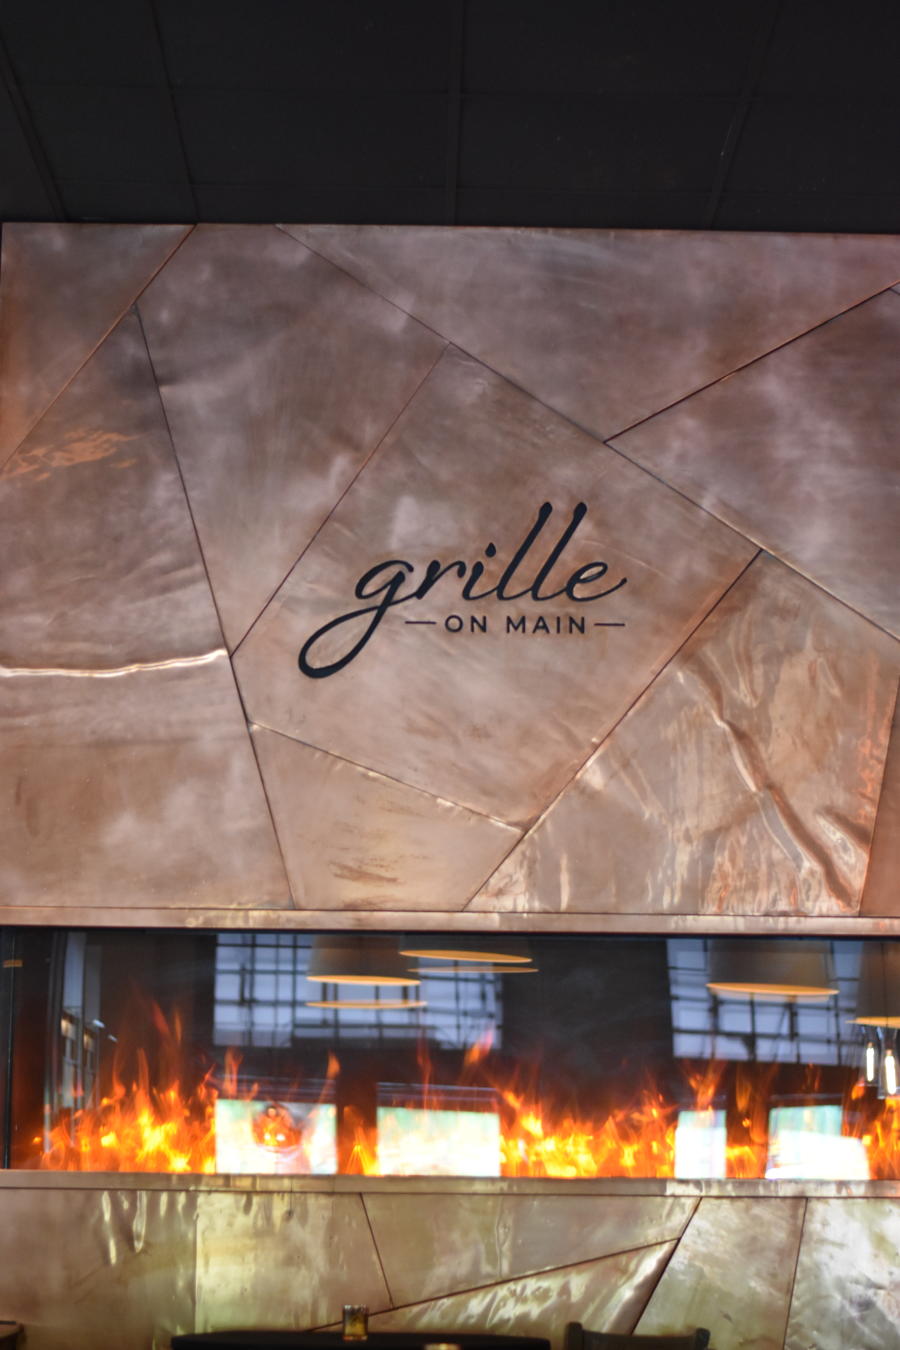 Grille on Main